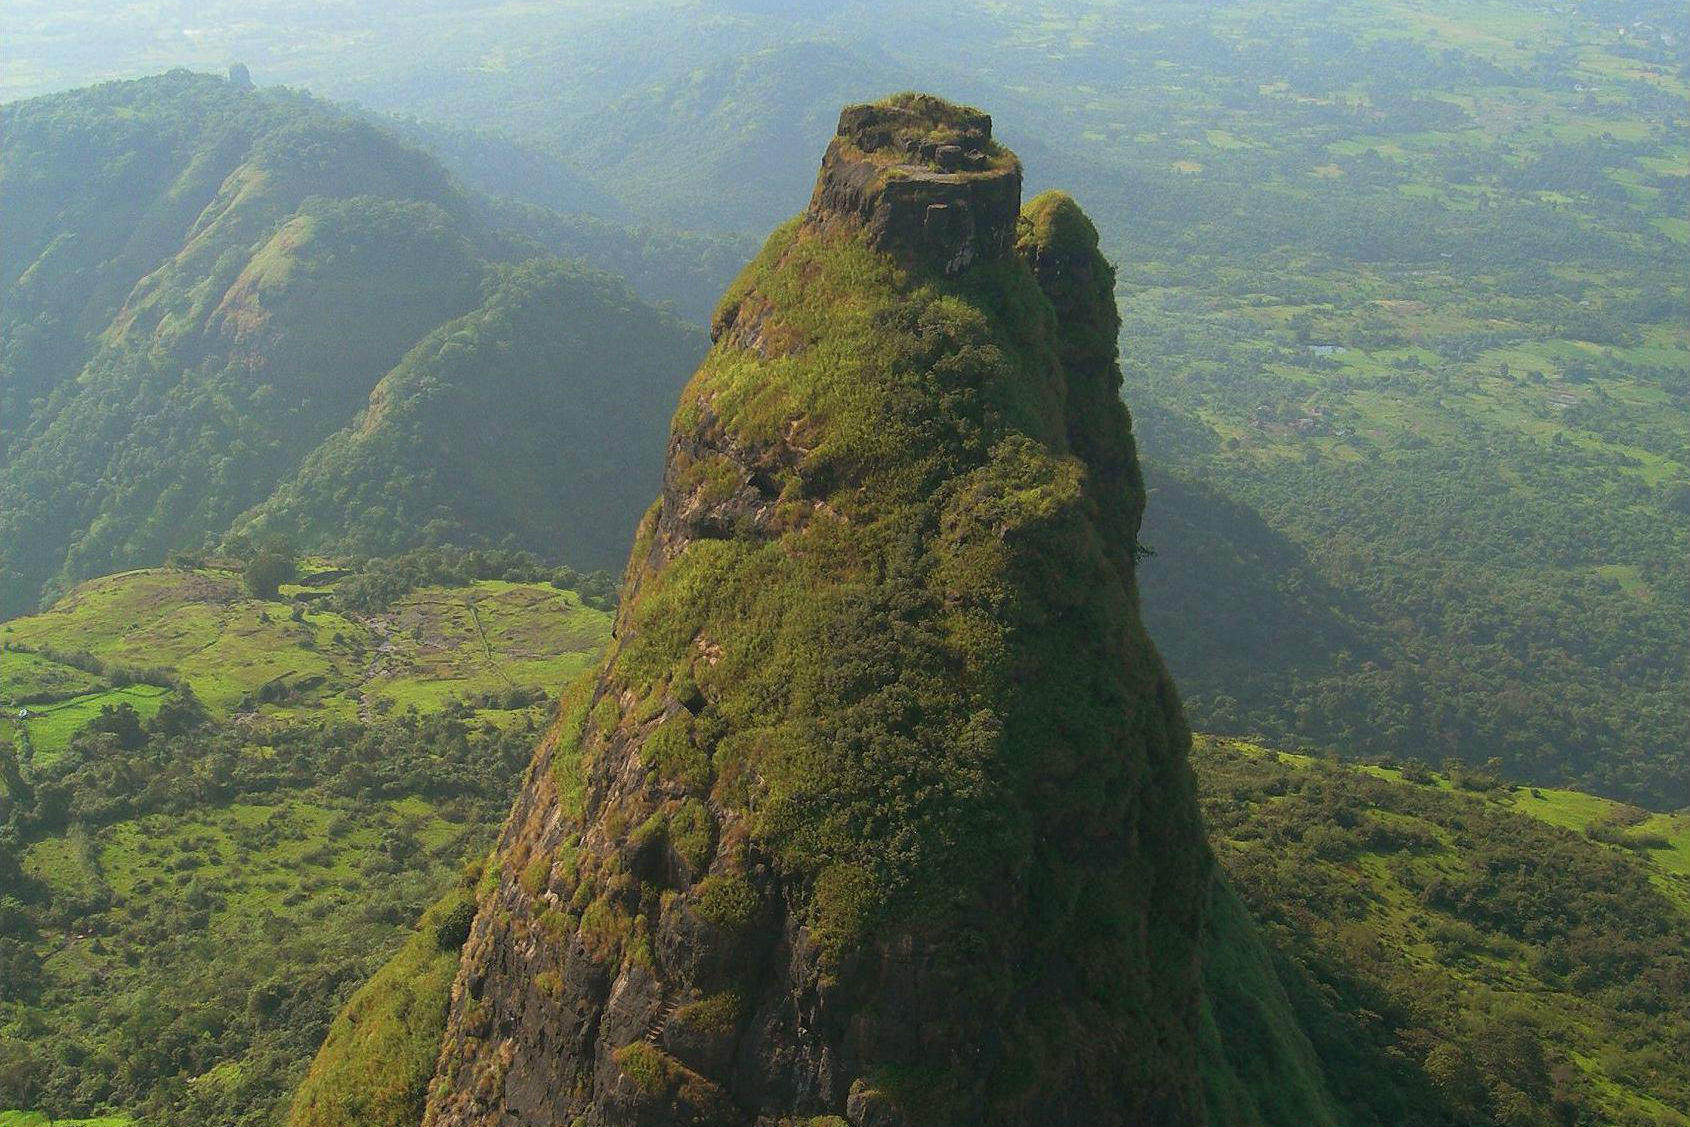 A dangerous fortress of solitude in the Western Ghats